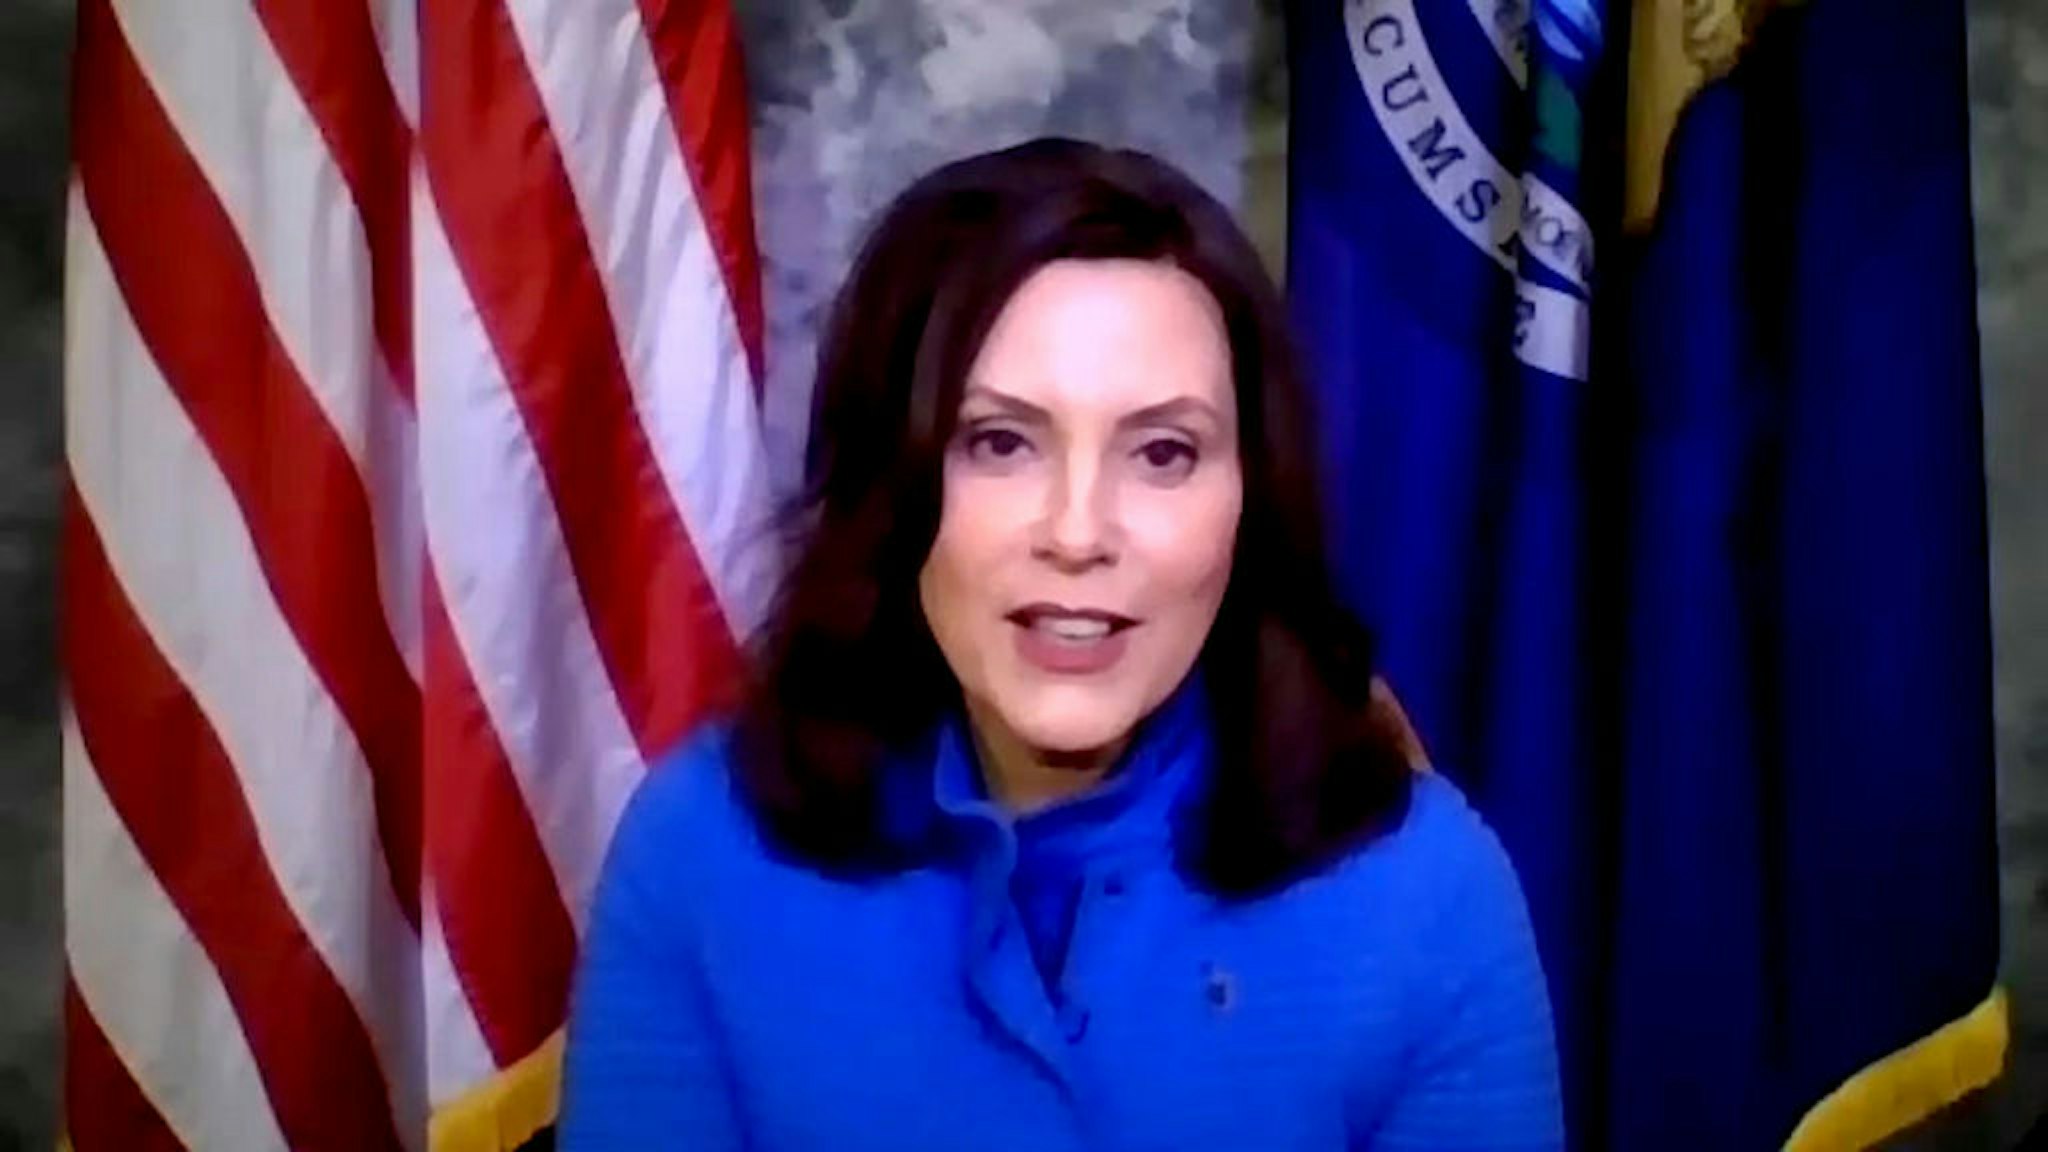 Pictured in this screen grab: Gov. Gretchen Whitmer during an interview on May 18, 2020